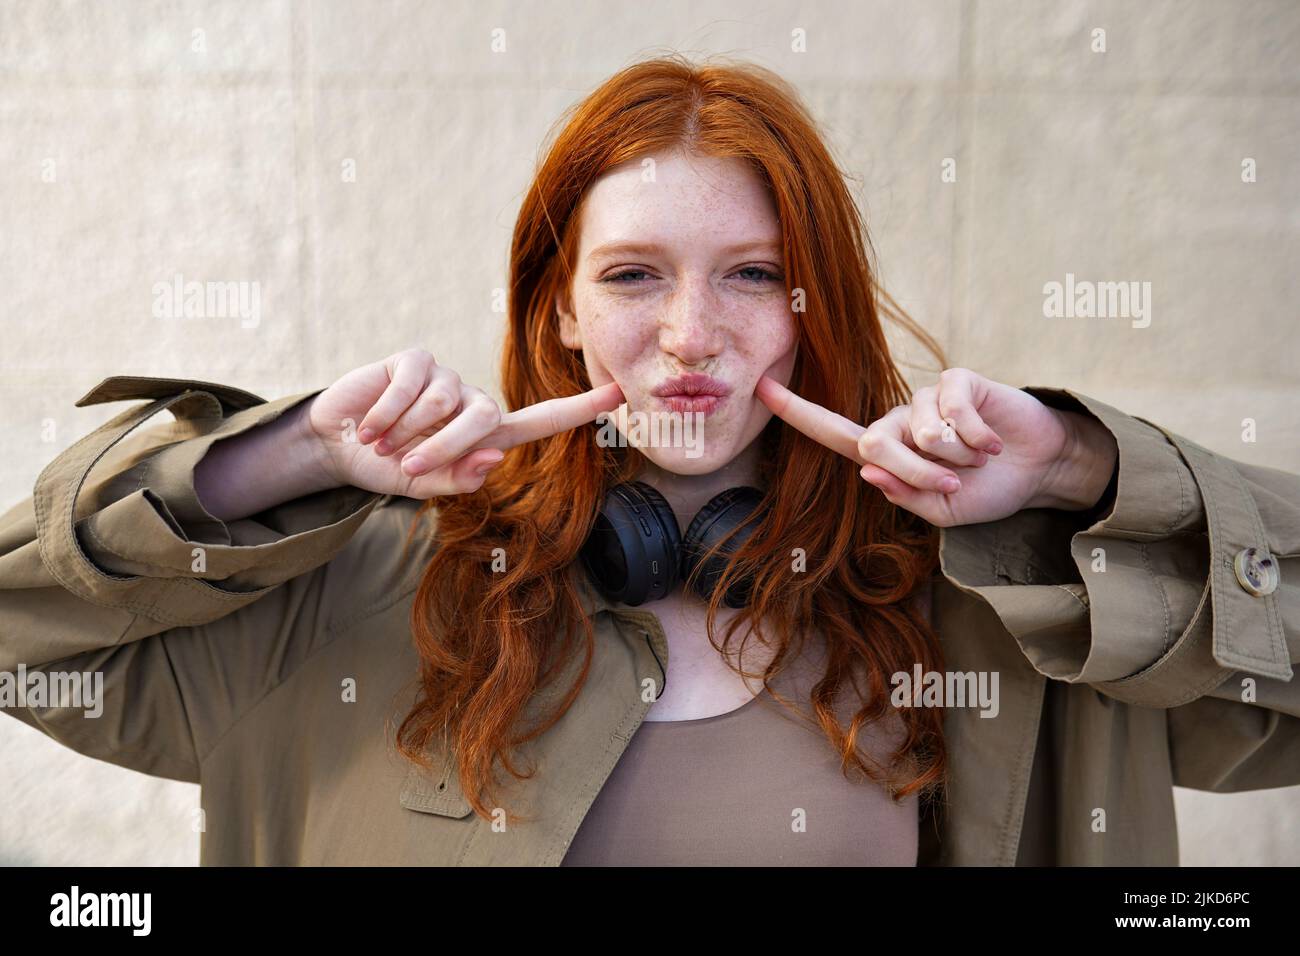 Happy funny teen redhead girl looking at camera on urban wall background. Stock Photo